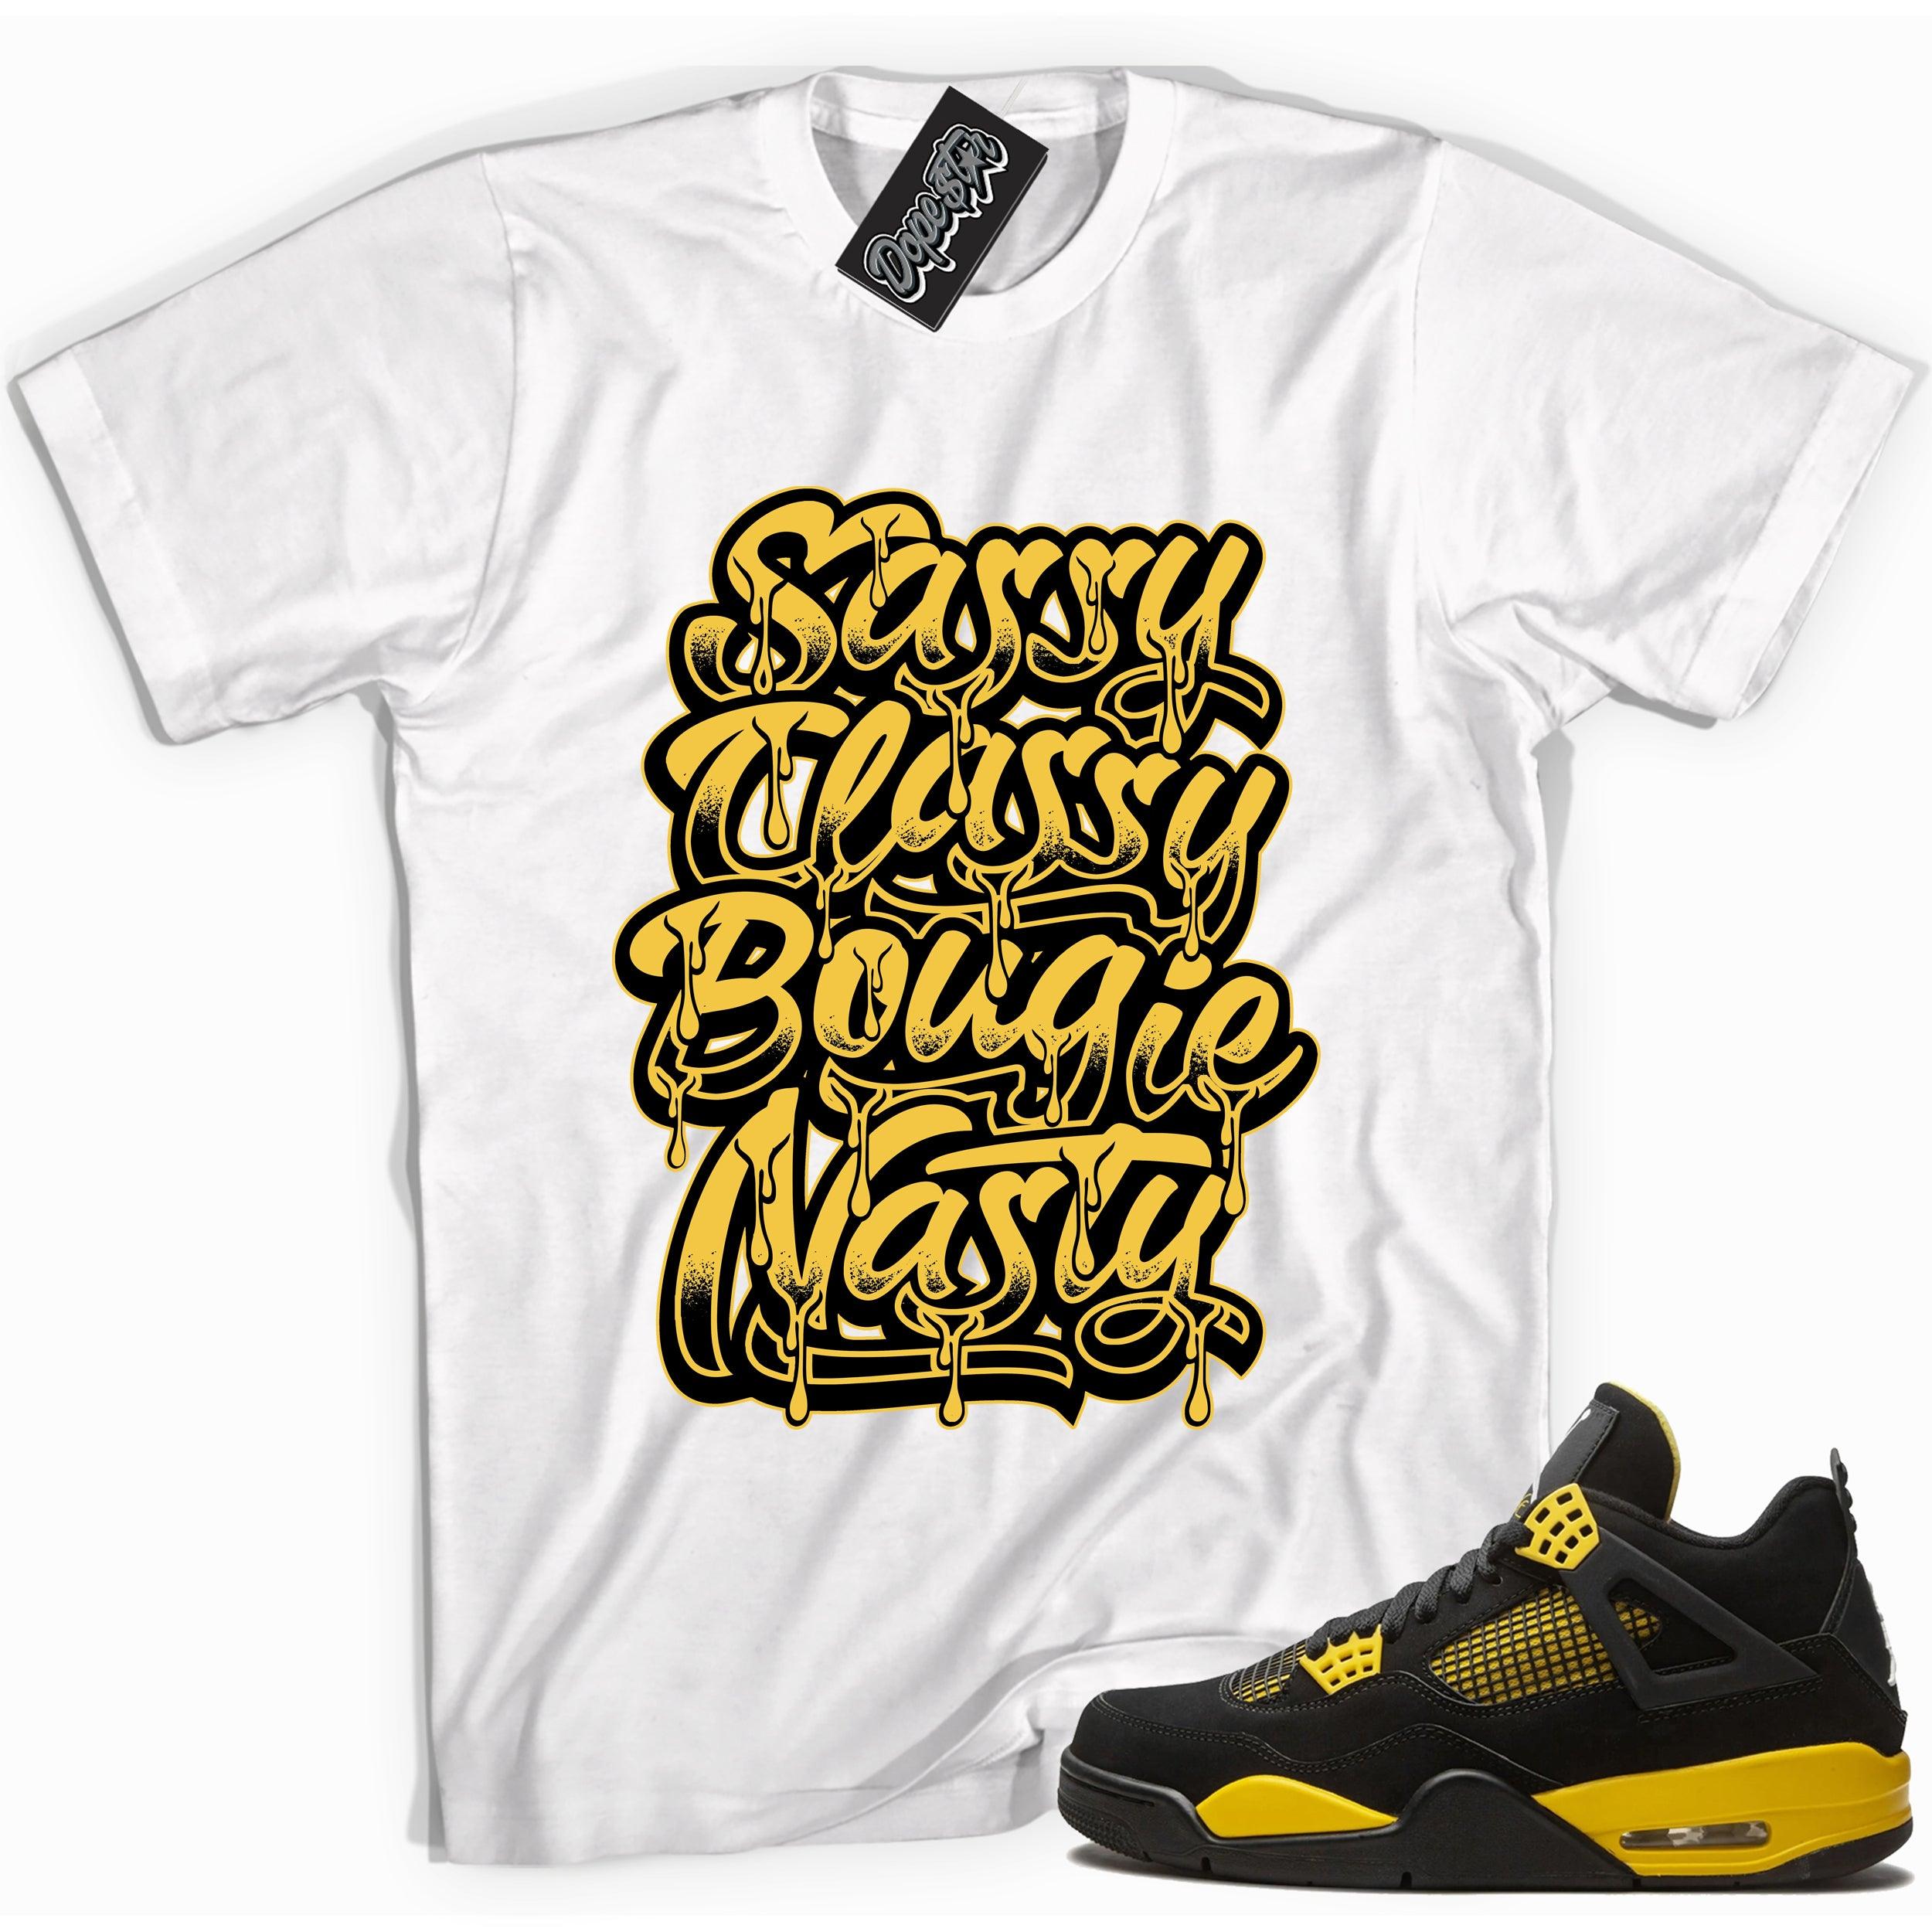 Cool white graphic tee with 'sassy classy bougie nasty' print, that perfectly matches Air Jordan 4 Thunder sneakers